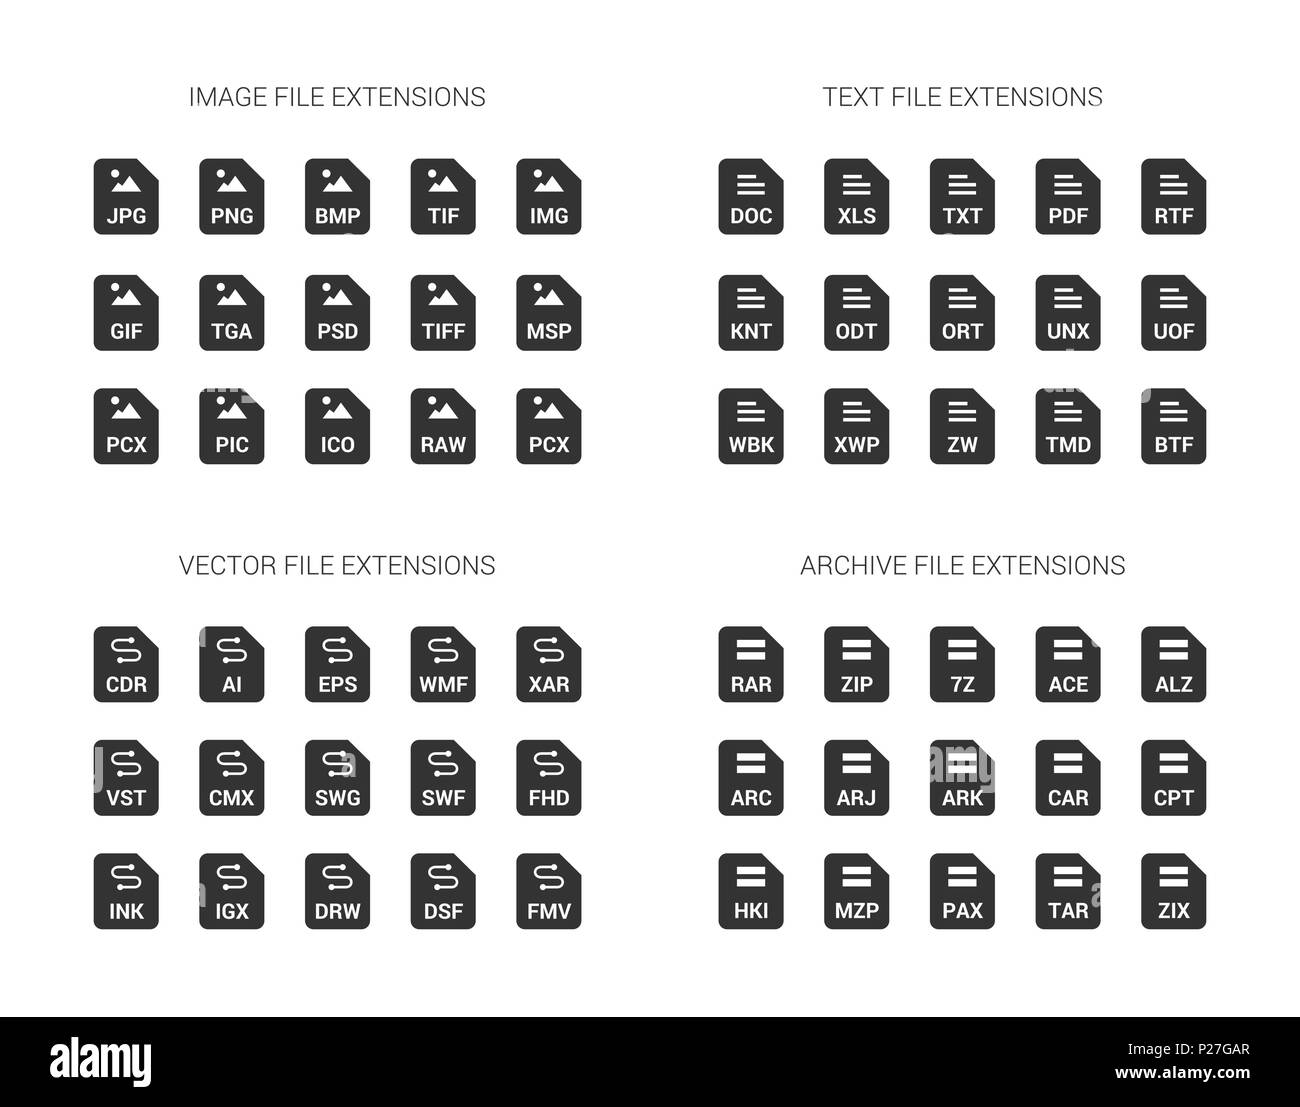 Filled black file extension flat vector icons isolated on white background. Image, text, archive, vector file types format Stock Vector